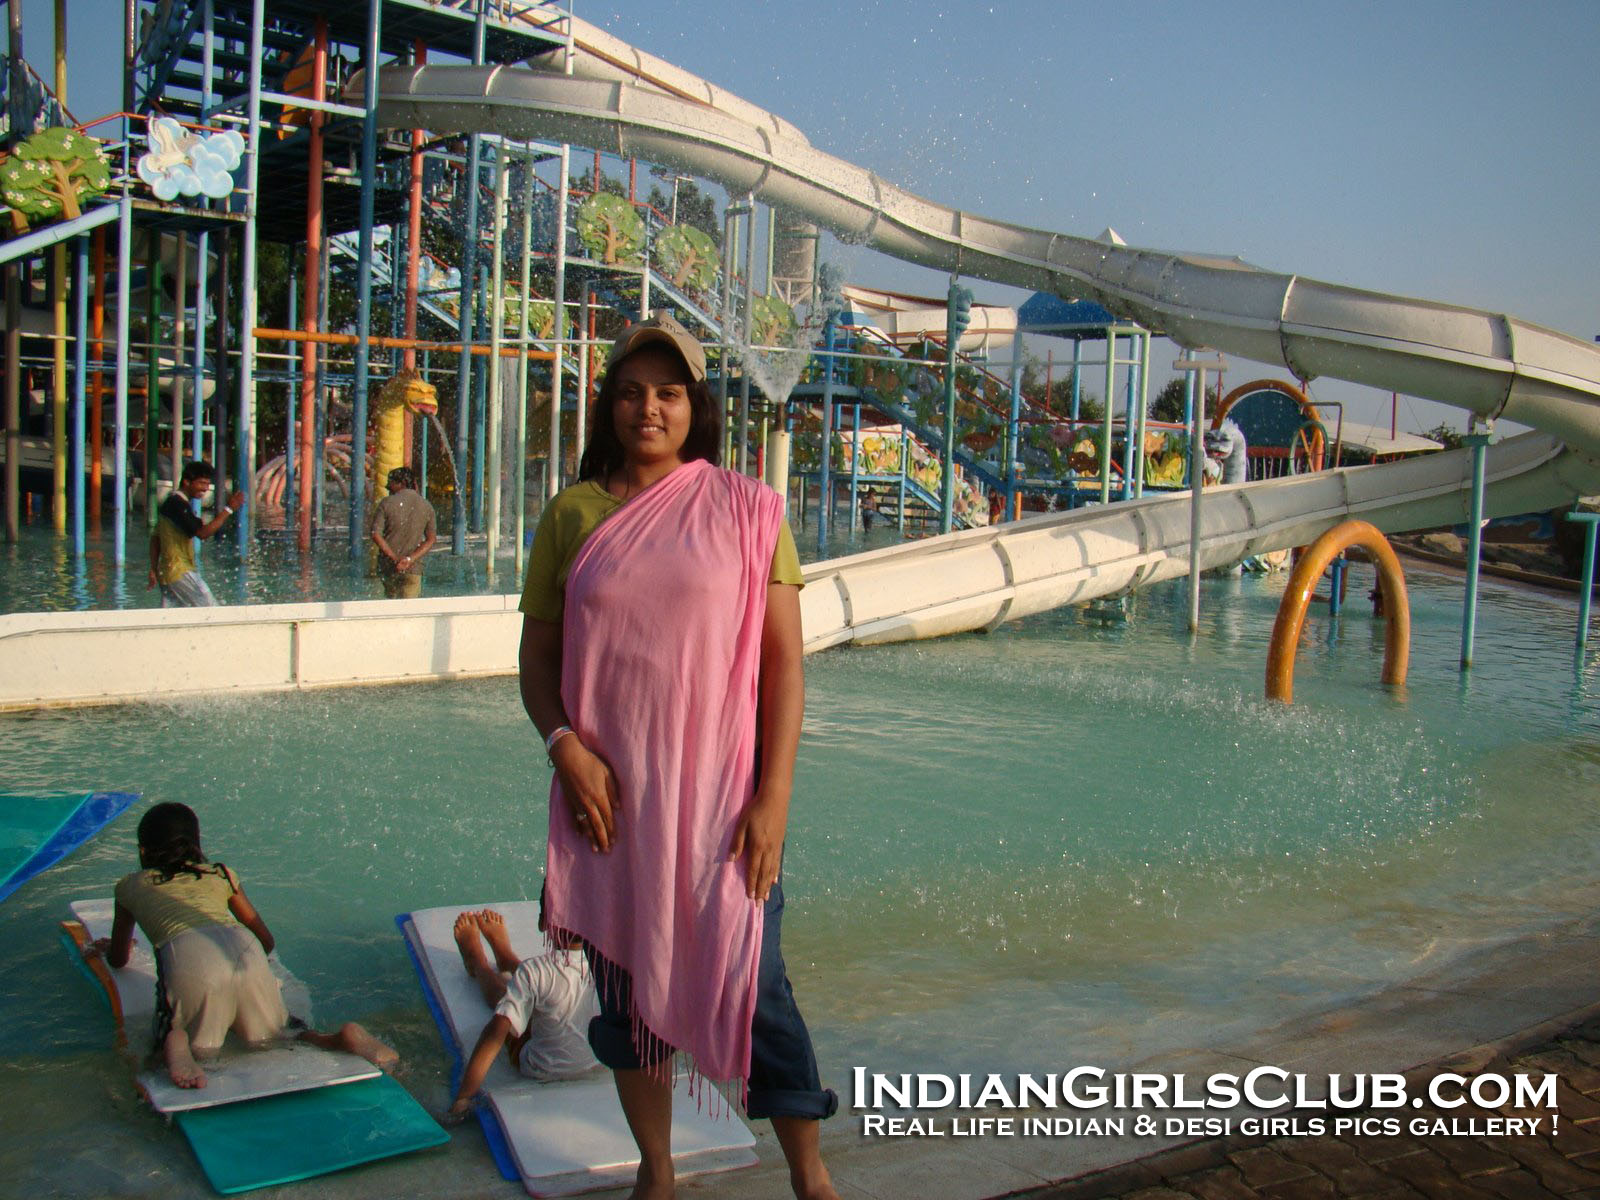 Indians Girls Nude Pool - Hot nude indian women waterpark image - Quality porn